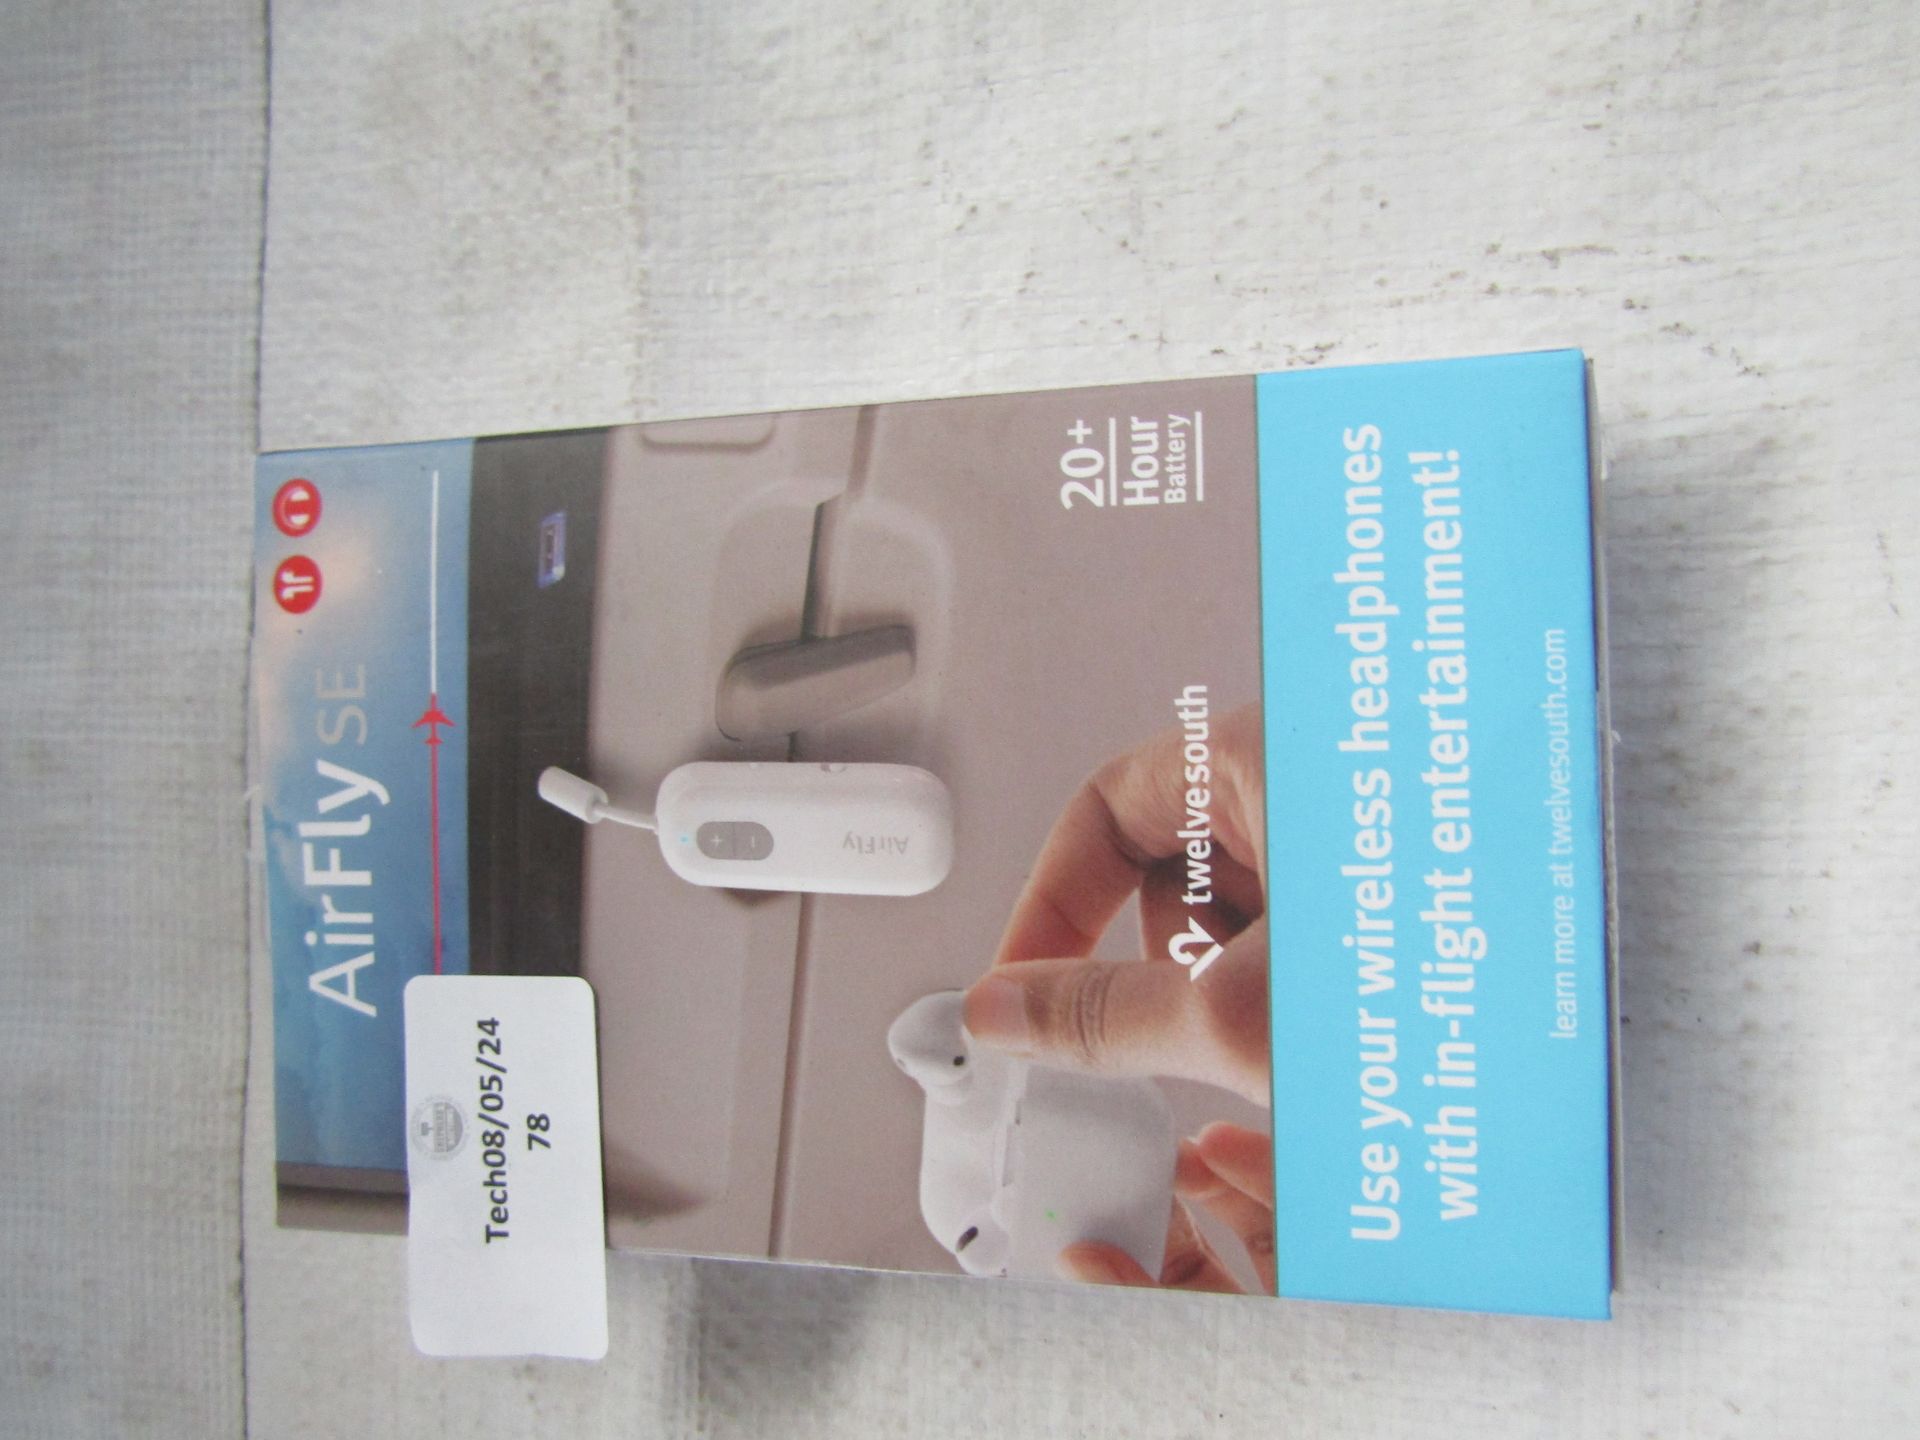 Airfly Se Wireless Jack, Unchecked & Boxed.